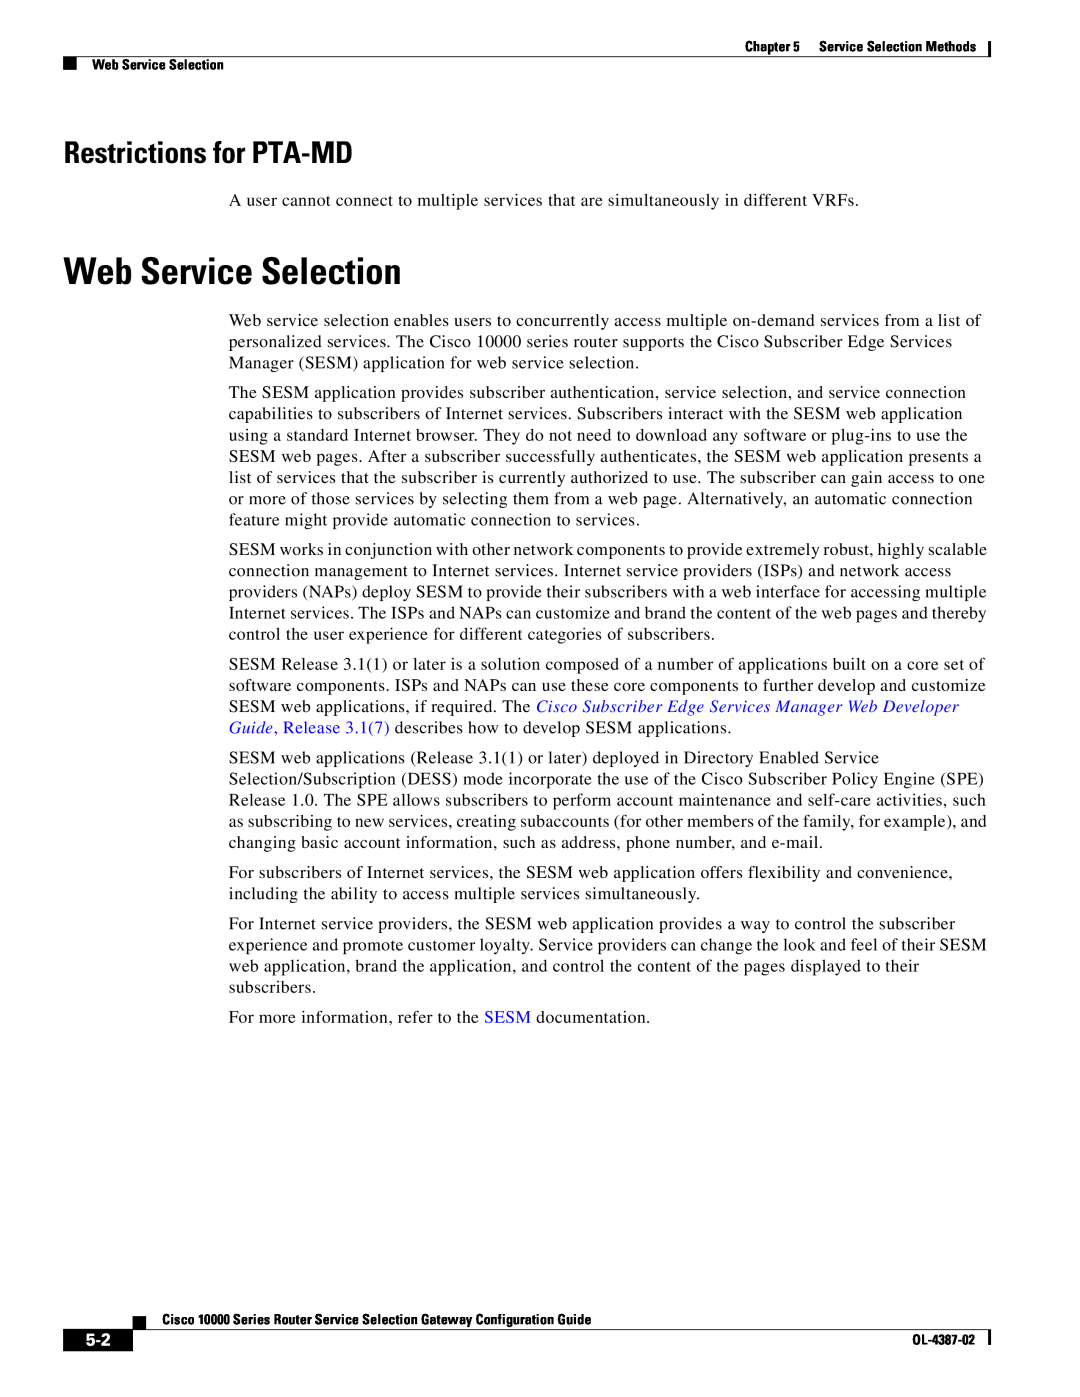 Cisco Systems OL-4387-02 manual Web Service Selection, Restrictions for PTA-MD 